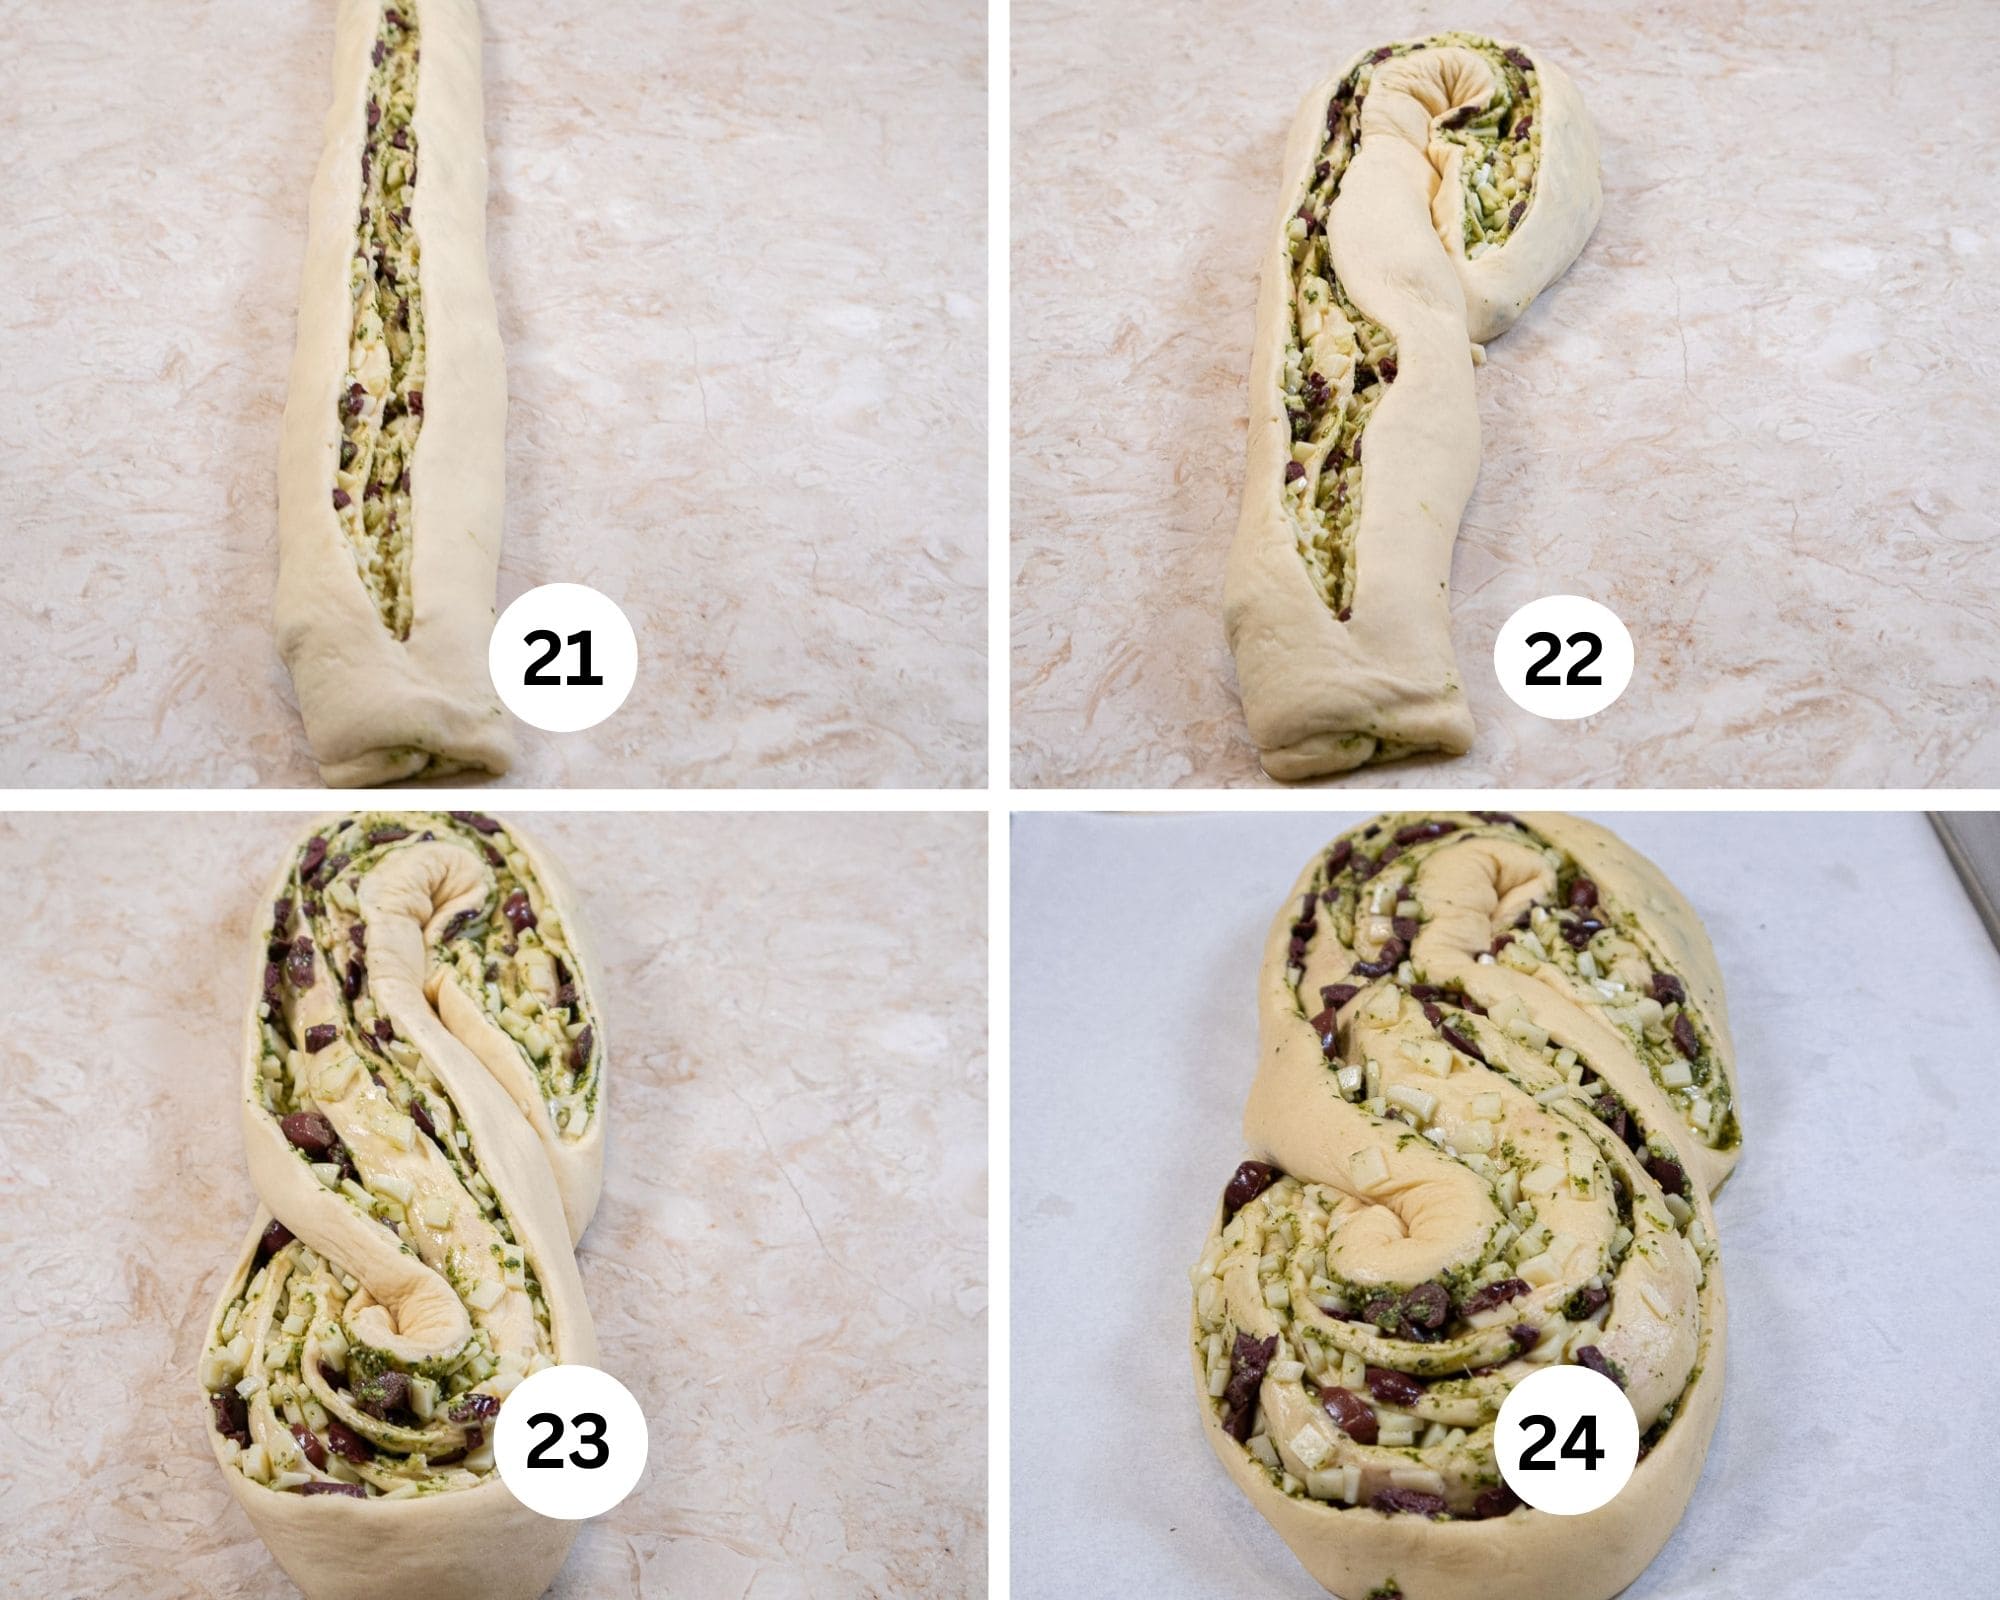 The last collage shows the roll of filled dough being cut open, the top of the dough pulled down to the center, the bottom of the dough brought  up to the center and the risen Pane Bianco.